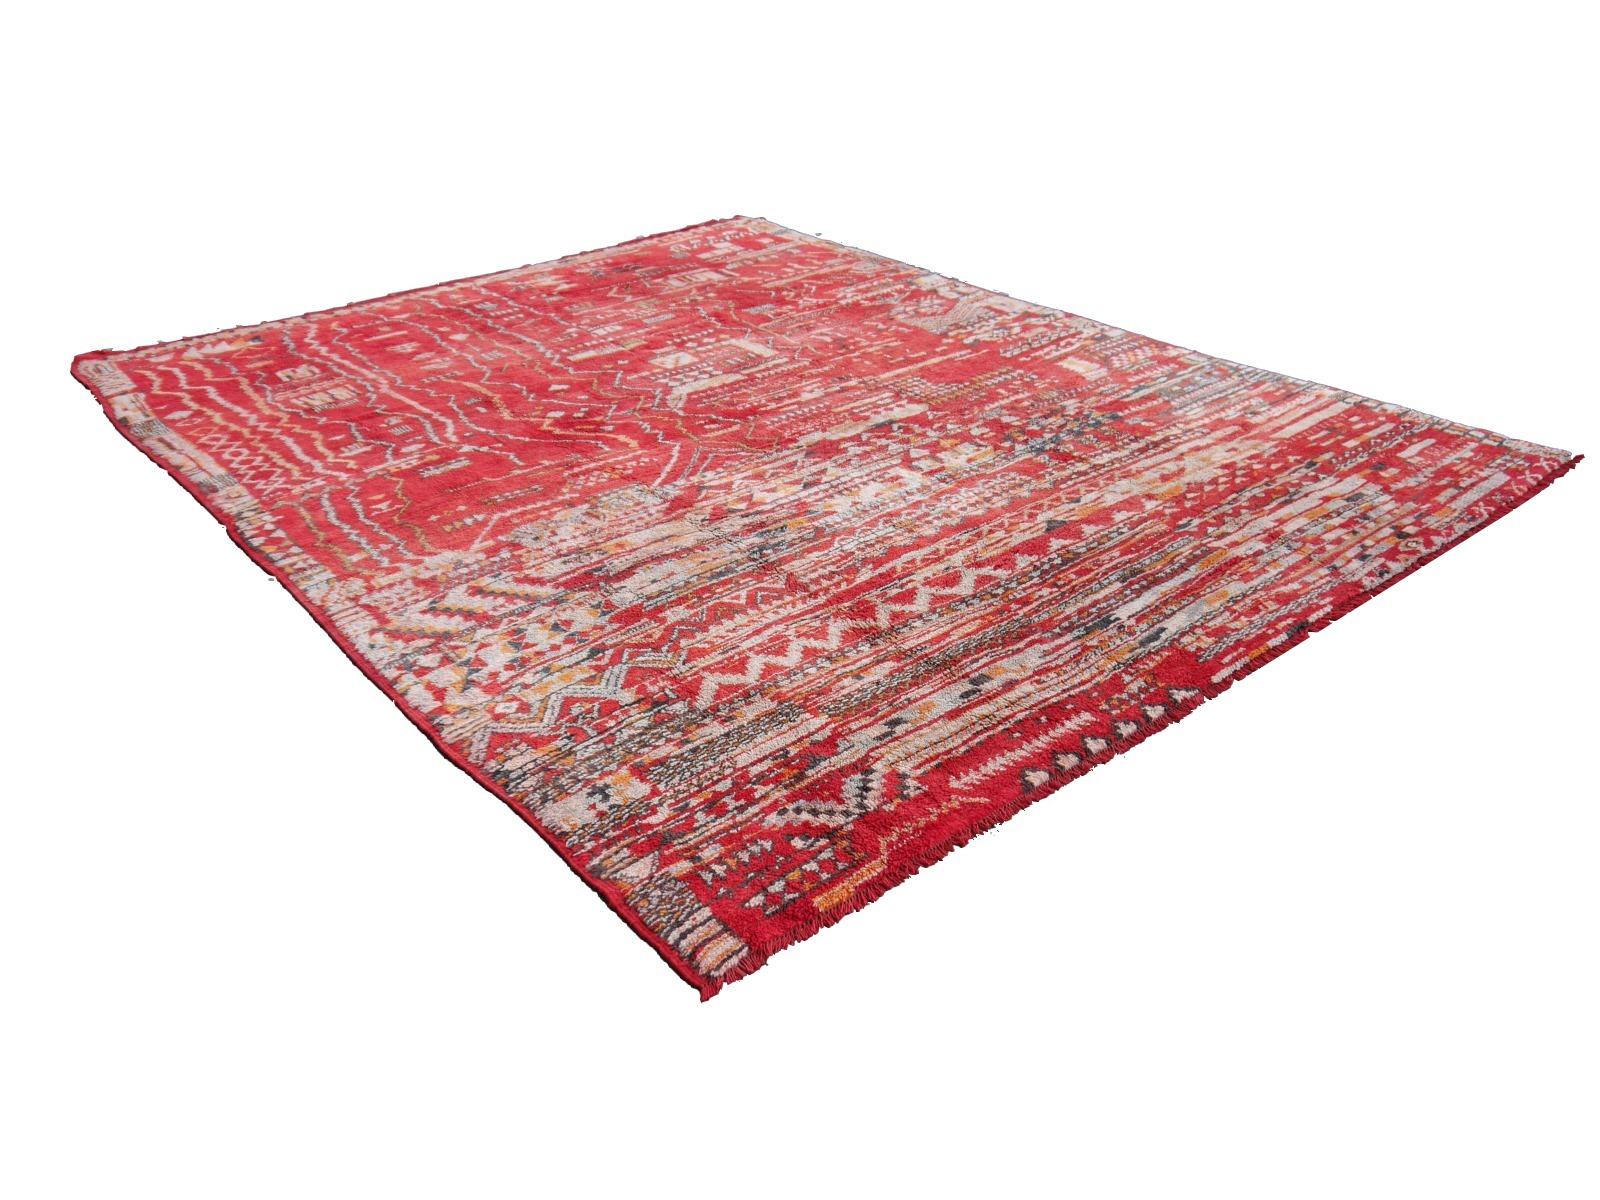 Large red Moroccan Amazigh vintage rug North African tribal design - Djoharian Collection 

Berber rugs and carpets are mainly made in Morocco, Tunesia and Algeria. Largest producer are the tribal and nomadic Berber people of Morocco. Different